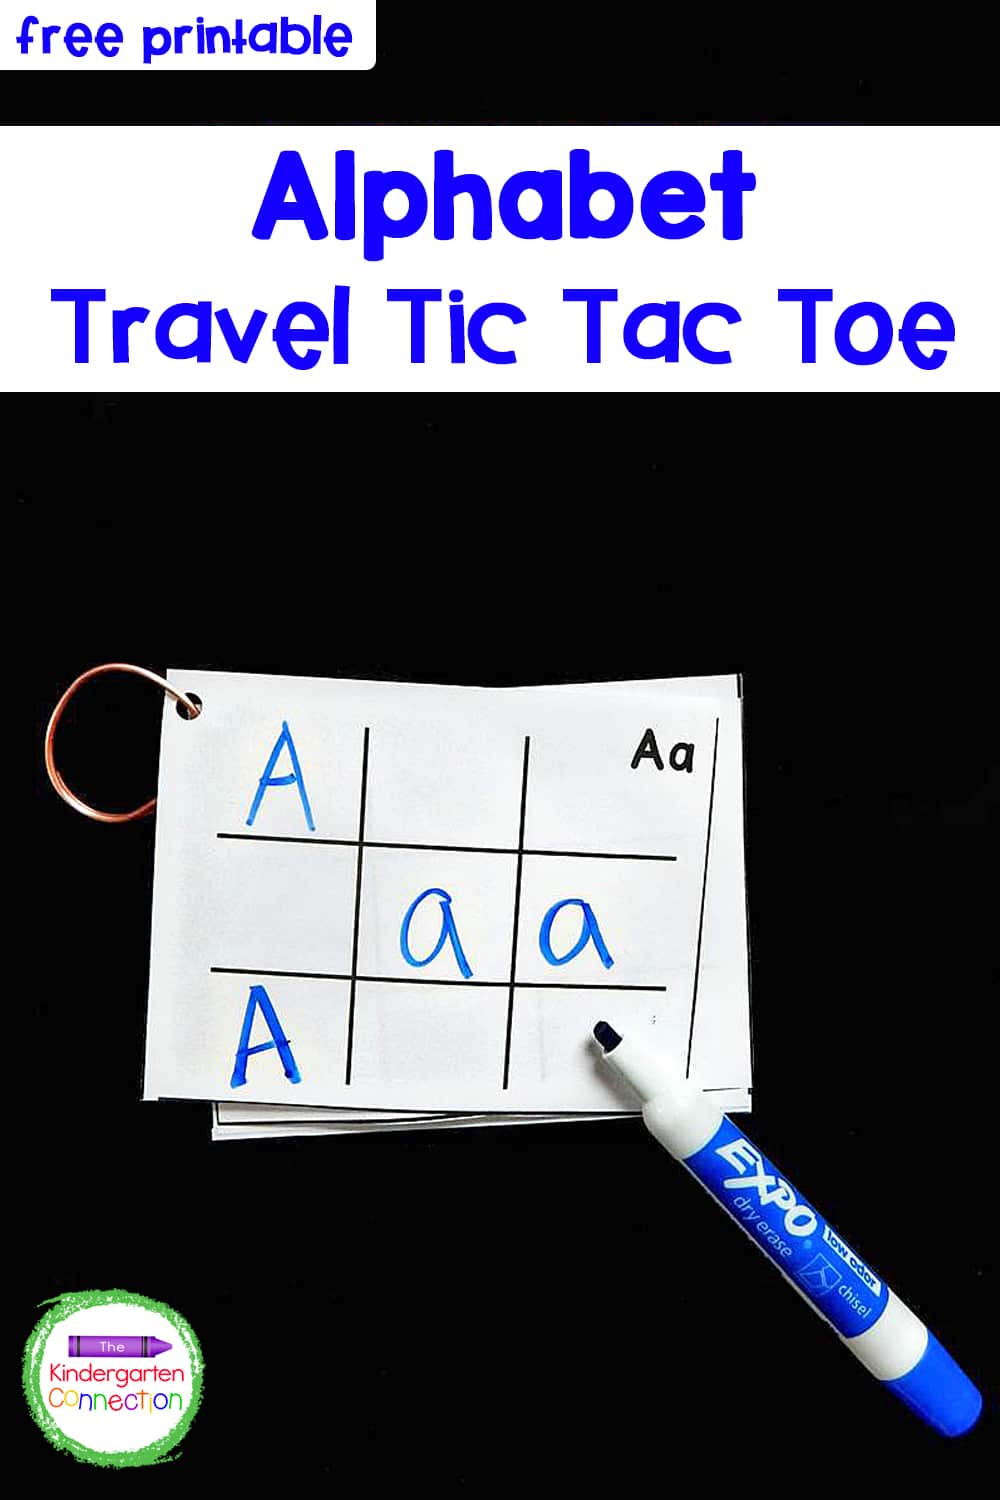 How to play Tic Tac Toe 